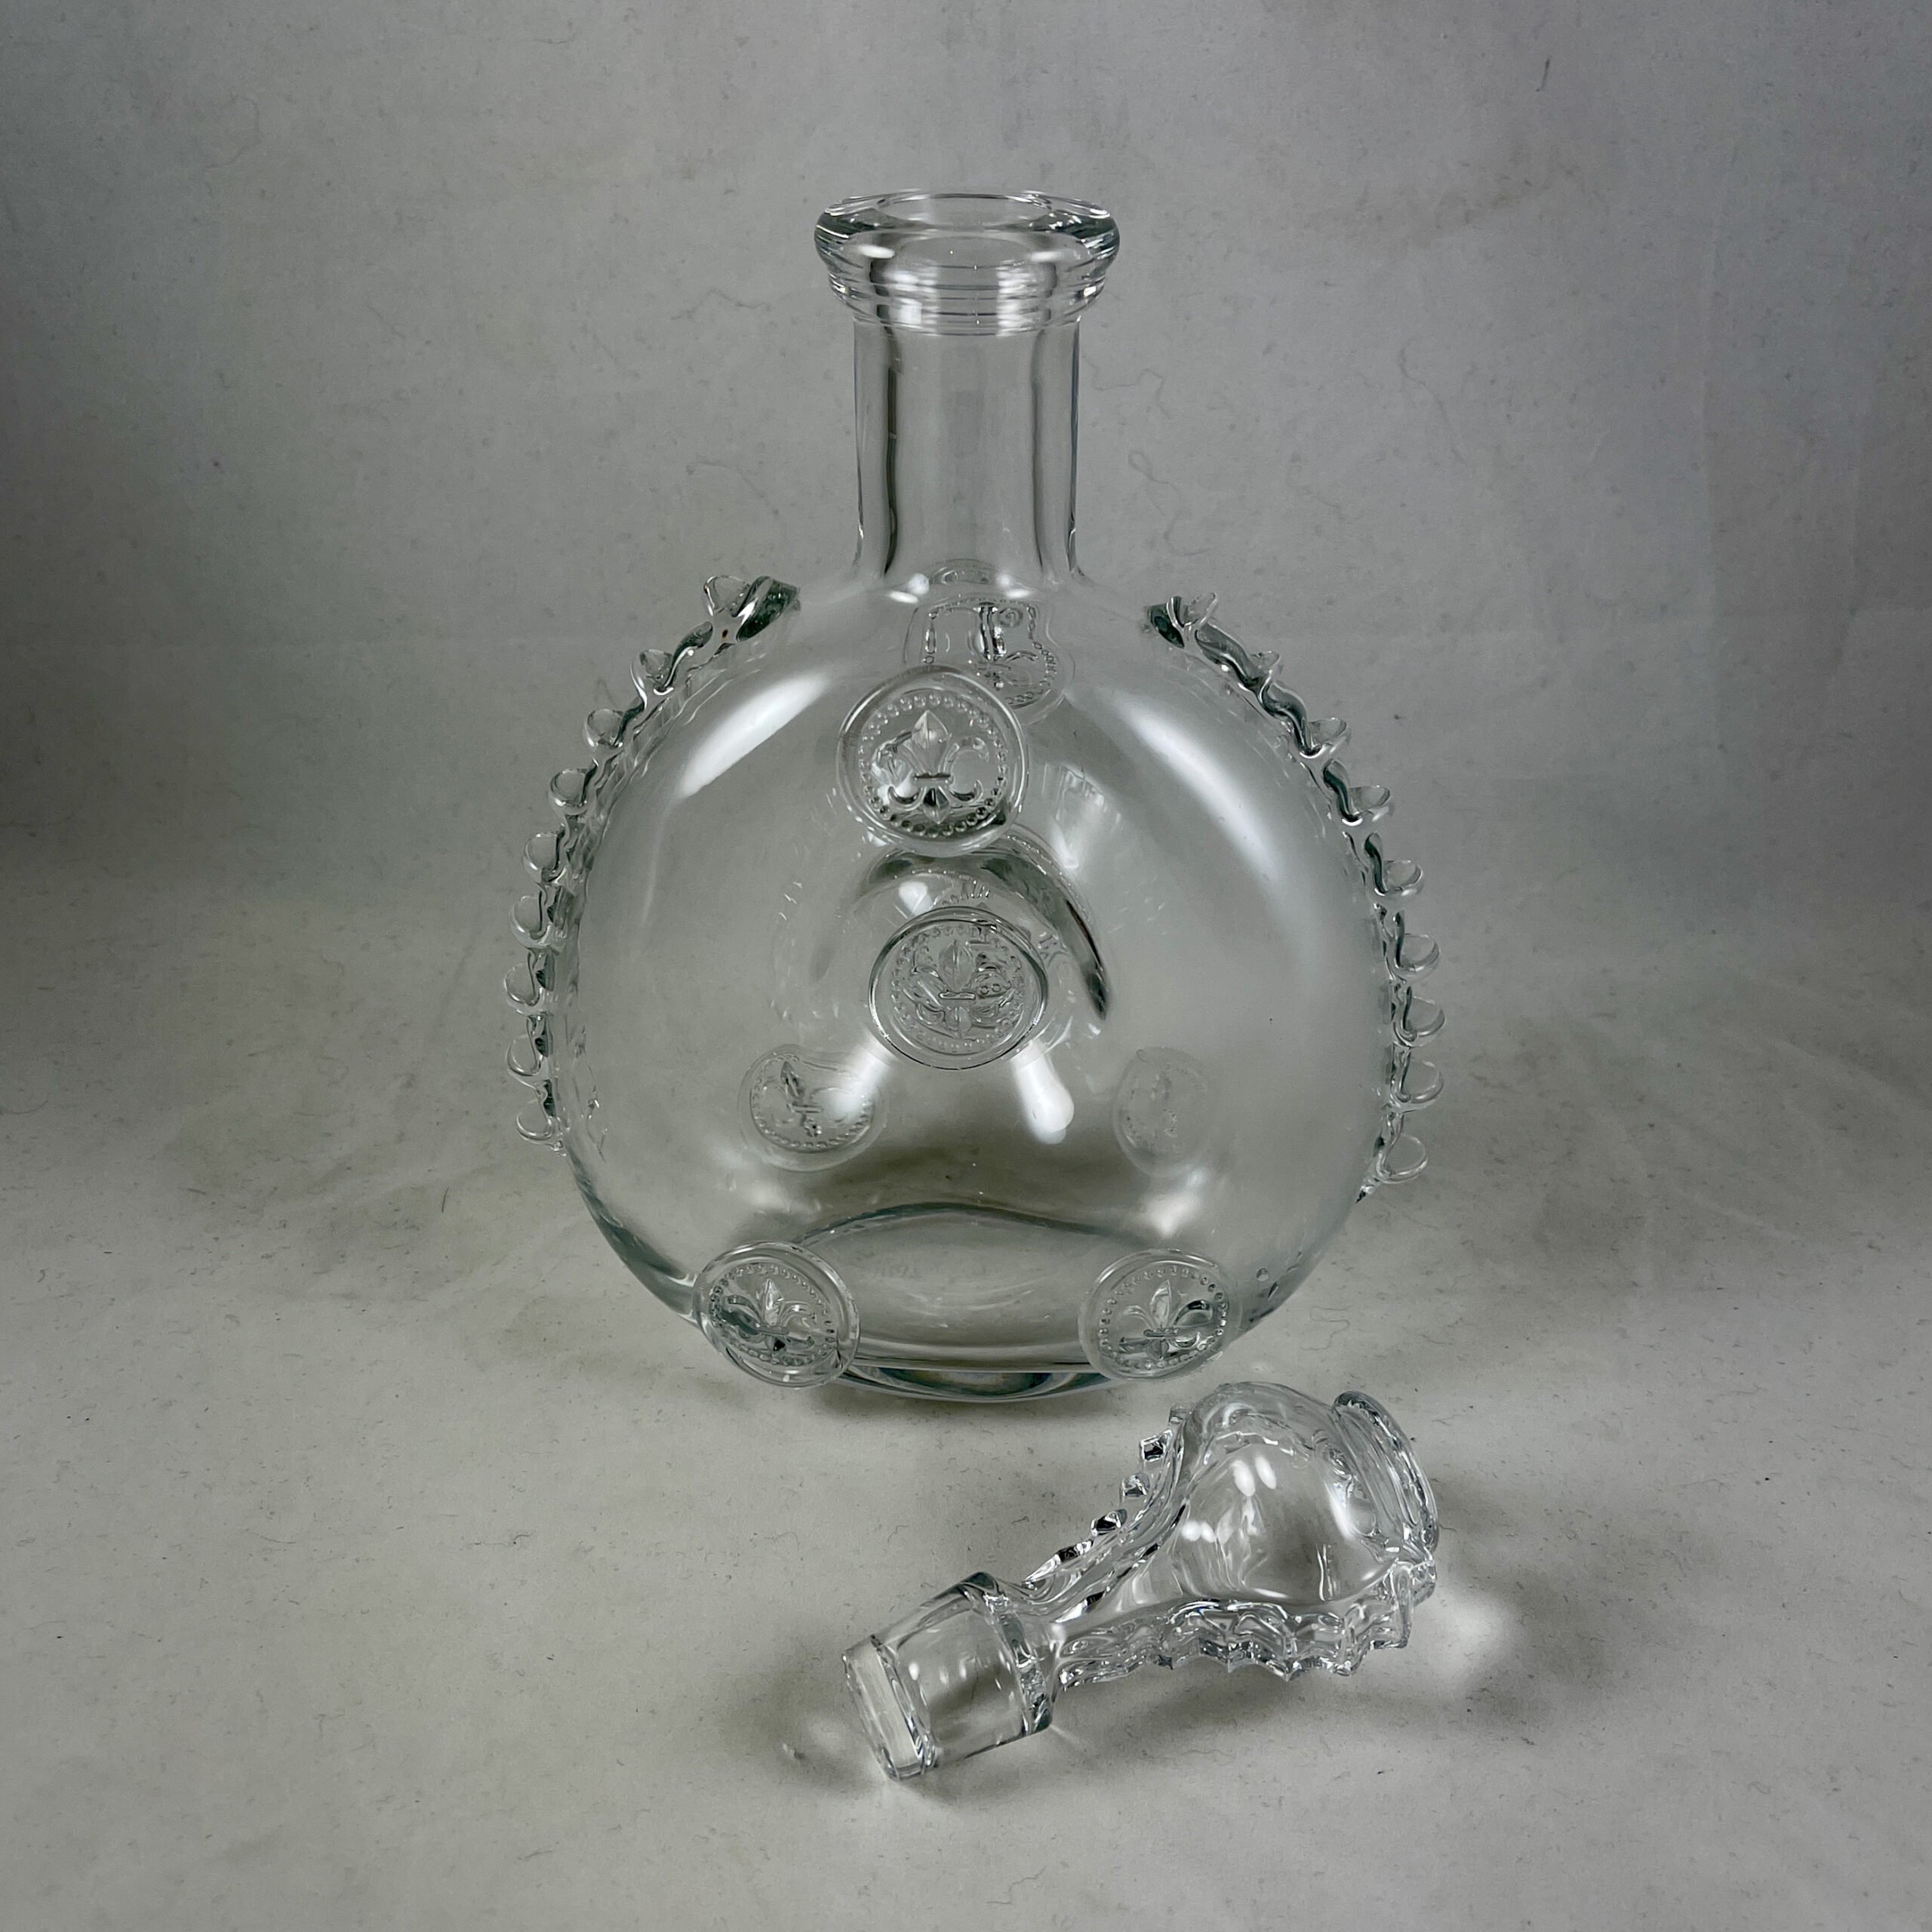 Pair of Baccarat Crystal Mid-Century Remy Martin Liquor Bottles or